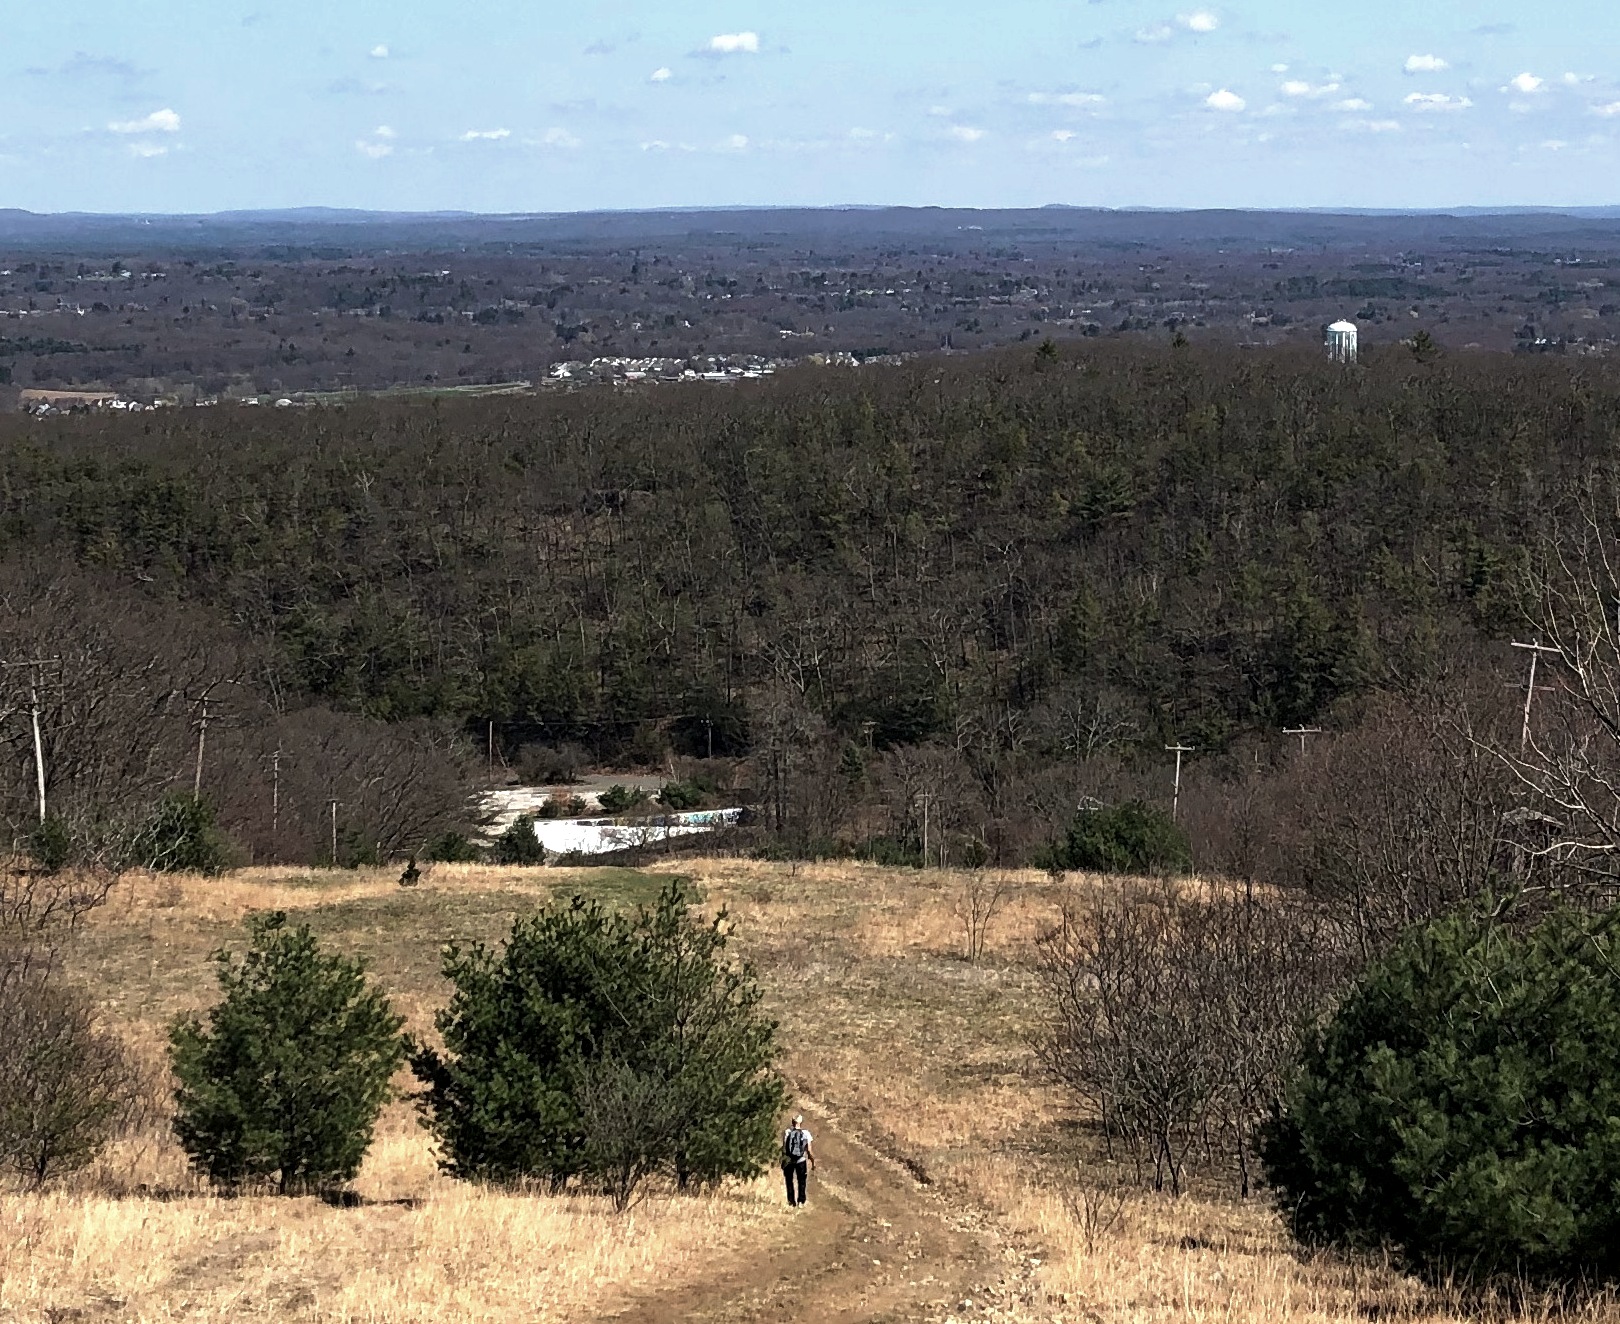 A lone hike walks down the side of Mt. Tom toward the side of the former ski lodge. The state is interested in maintaining Mt. Tom as a resource for nature and outdoor activities.